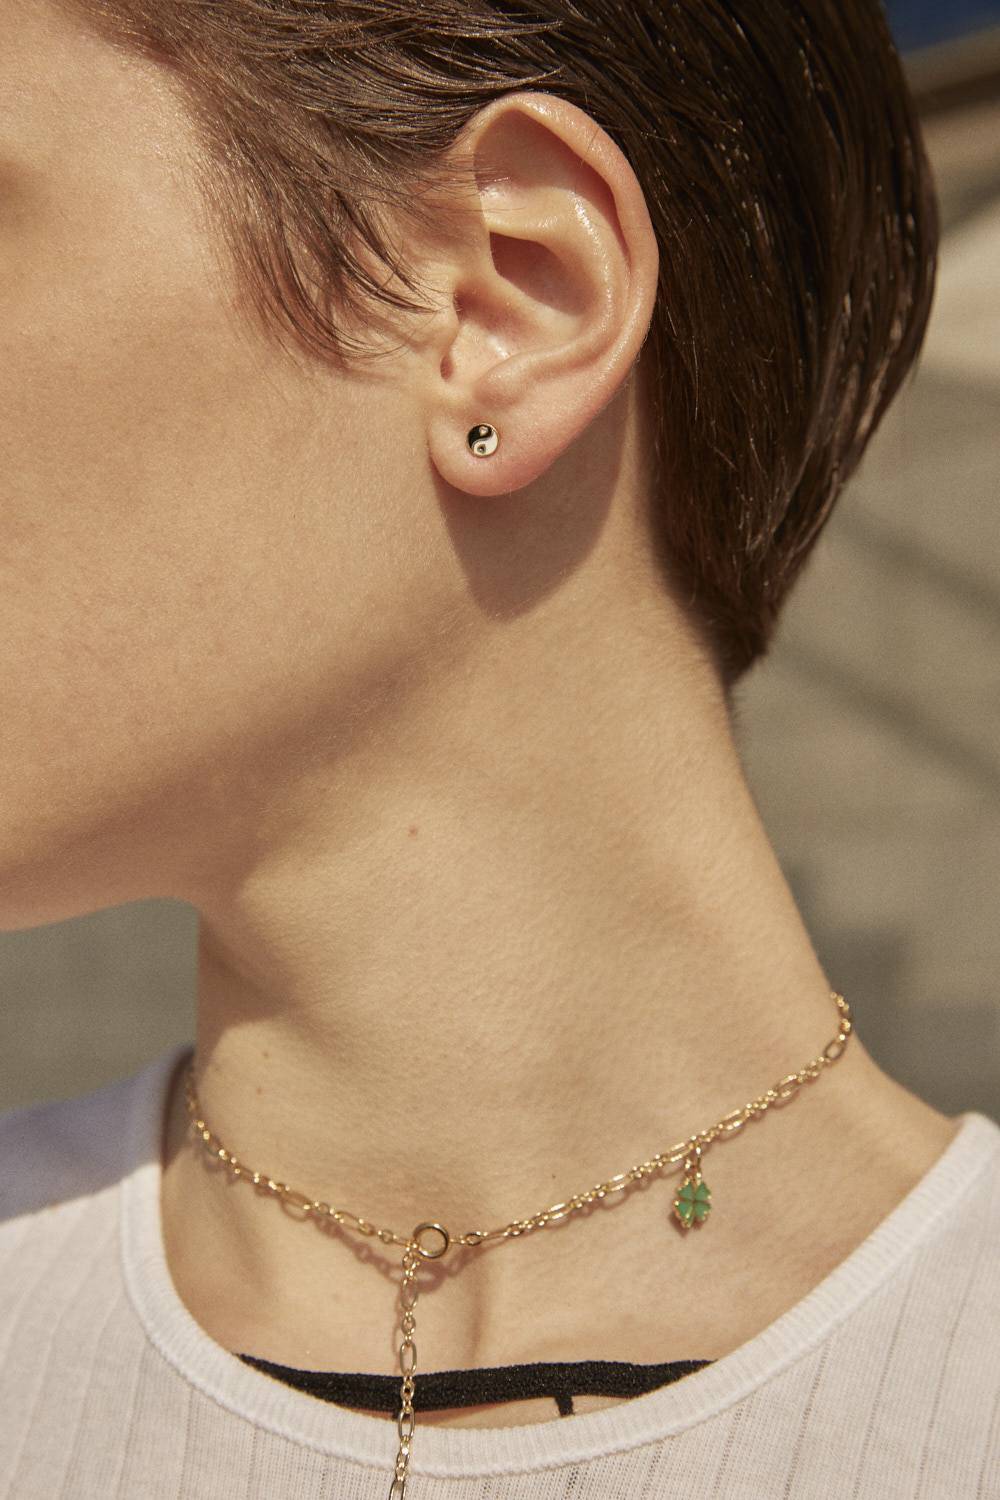 Eco-friendly jewellery brand ZAMT just launched their new Bloomland collection, with the yin-yang design as its signature